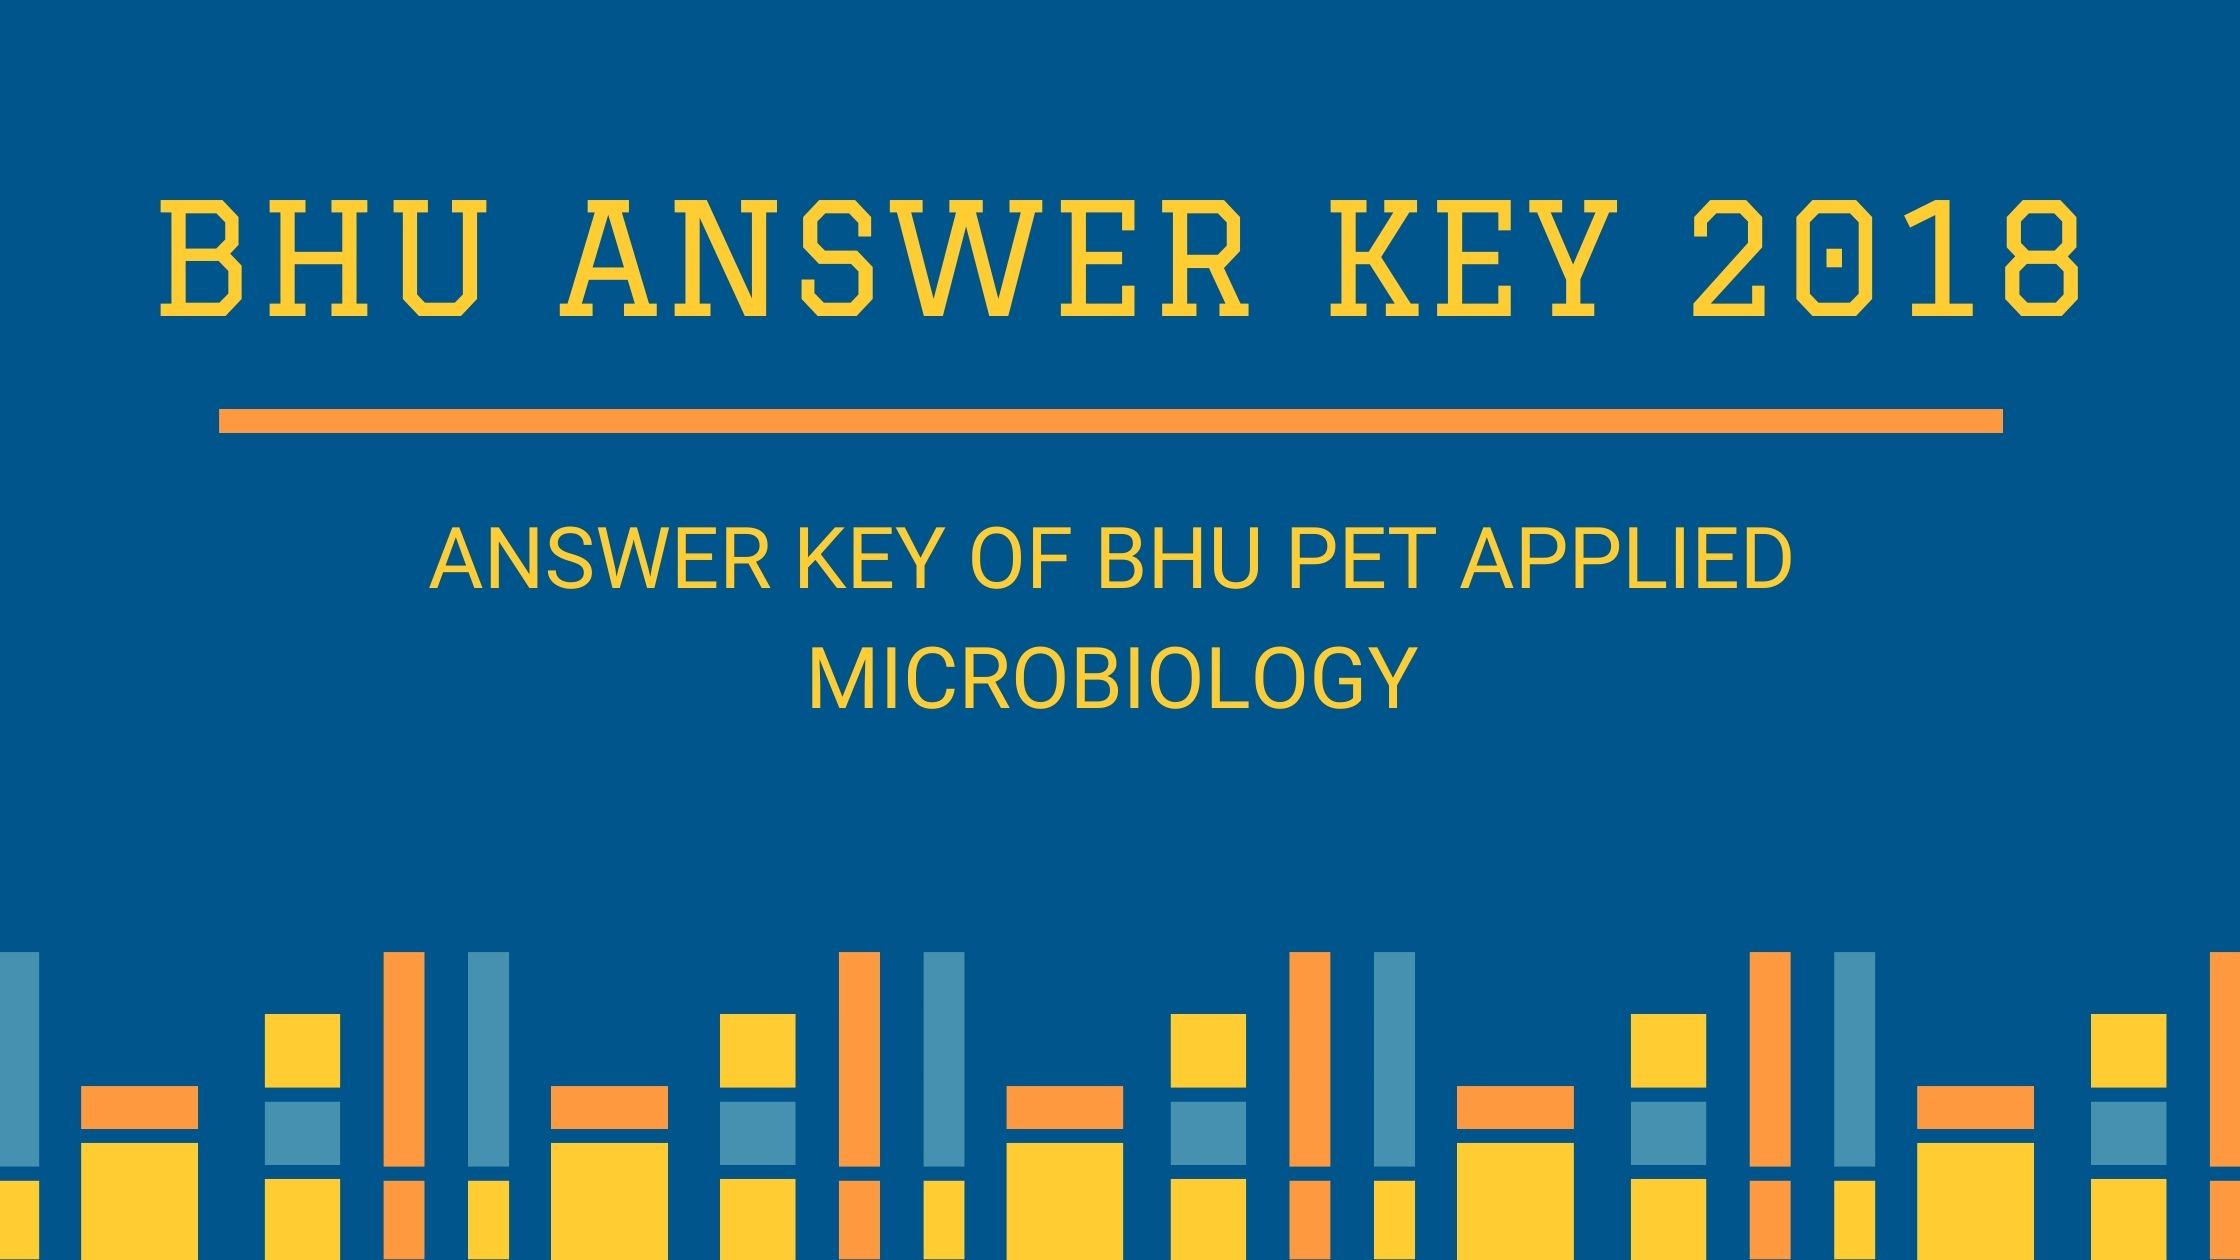 Answer Key of BHU PET Applied Microbiology 2018